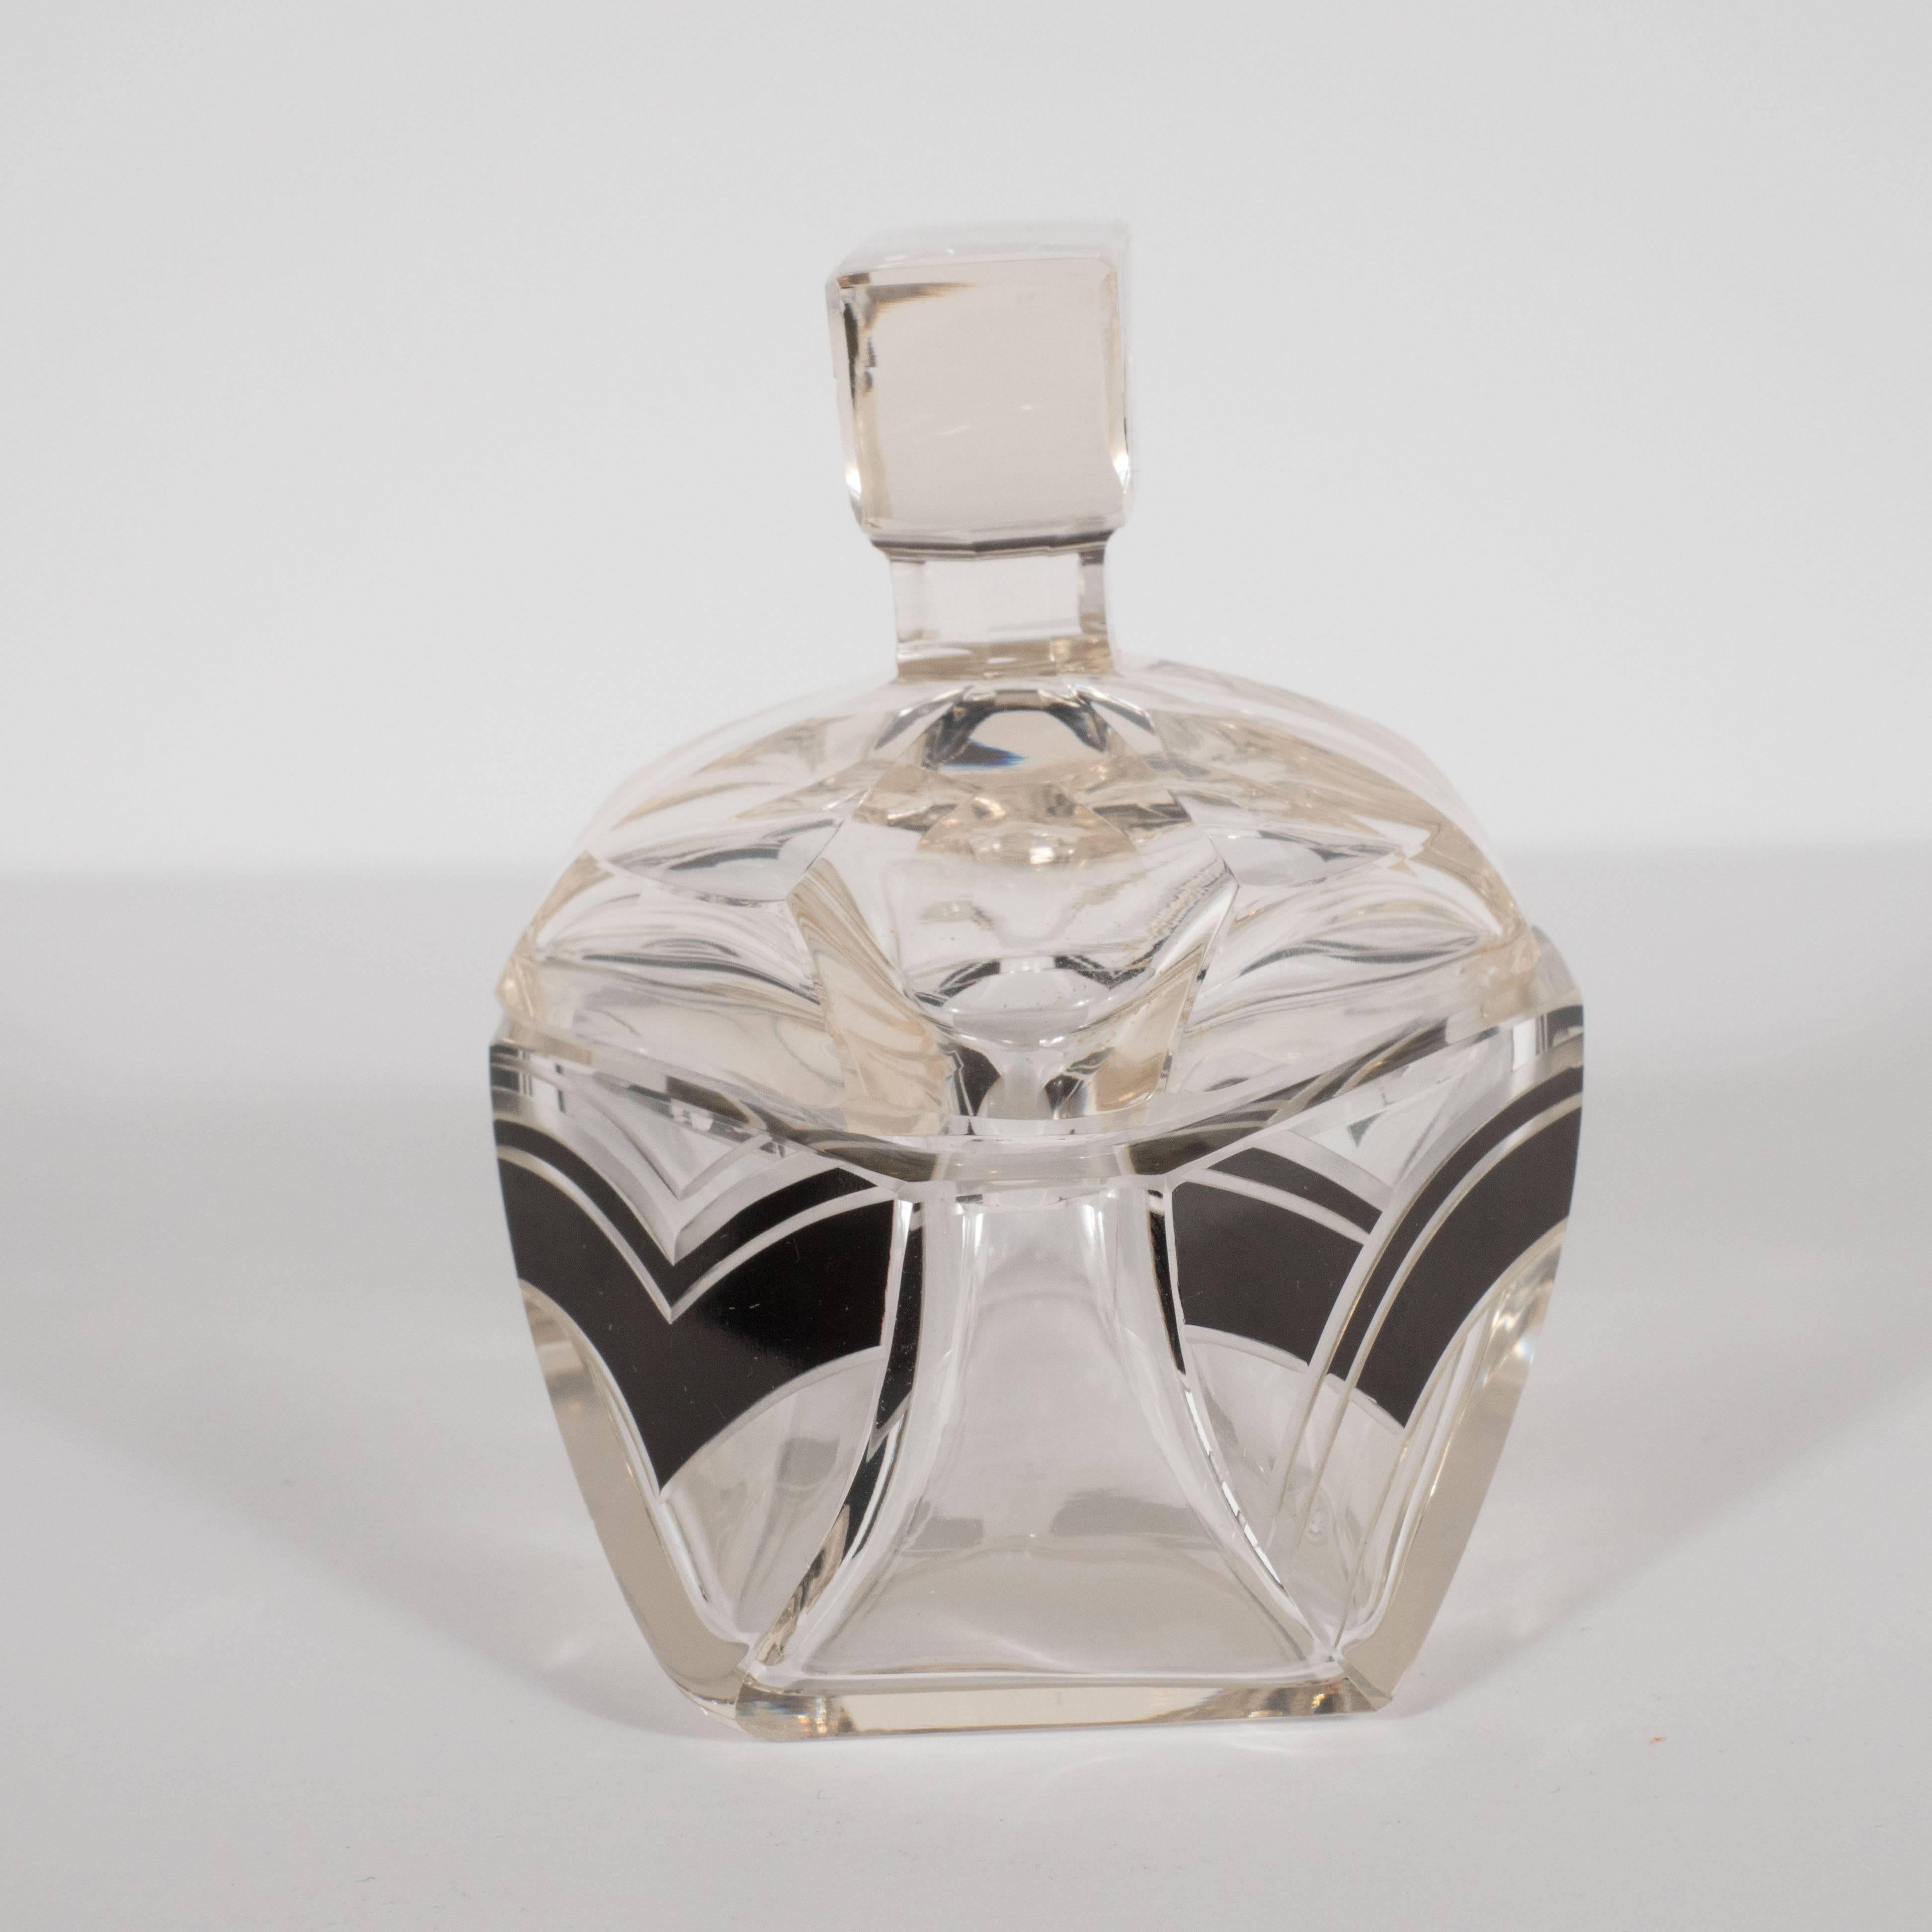 American Czech Art Deco Cubist Glass Perfume Bottle with Frosted and Black Glass Overlays